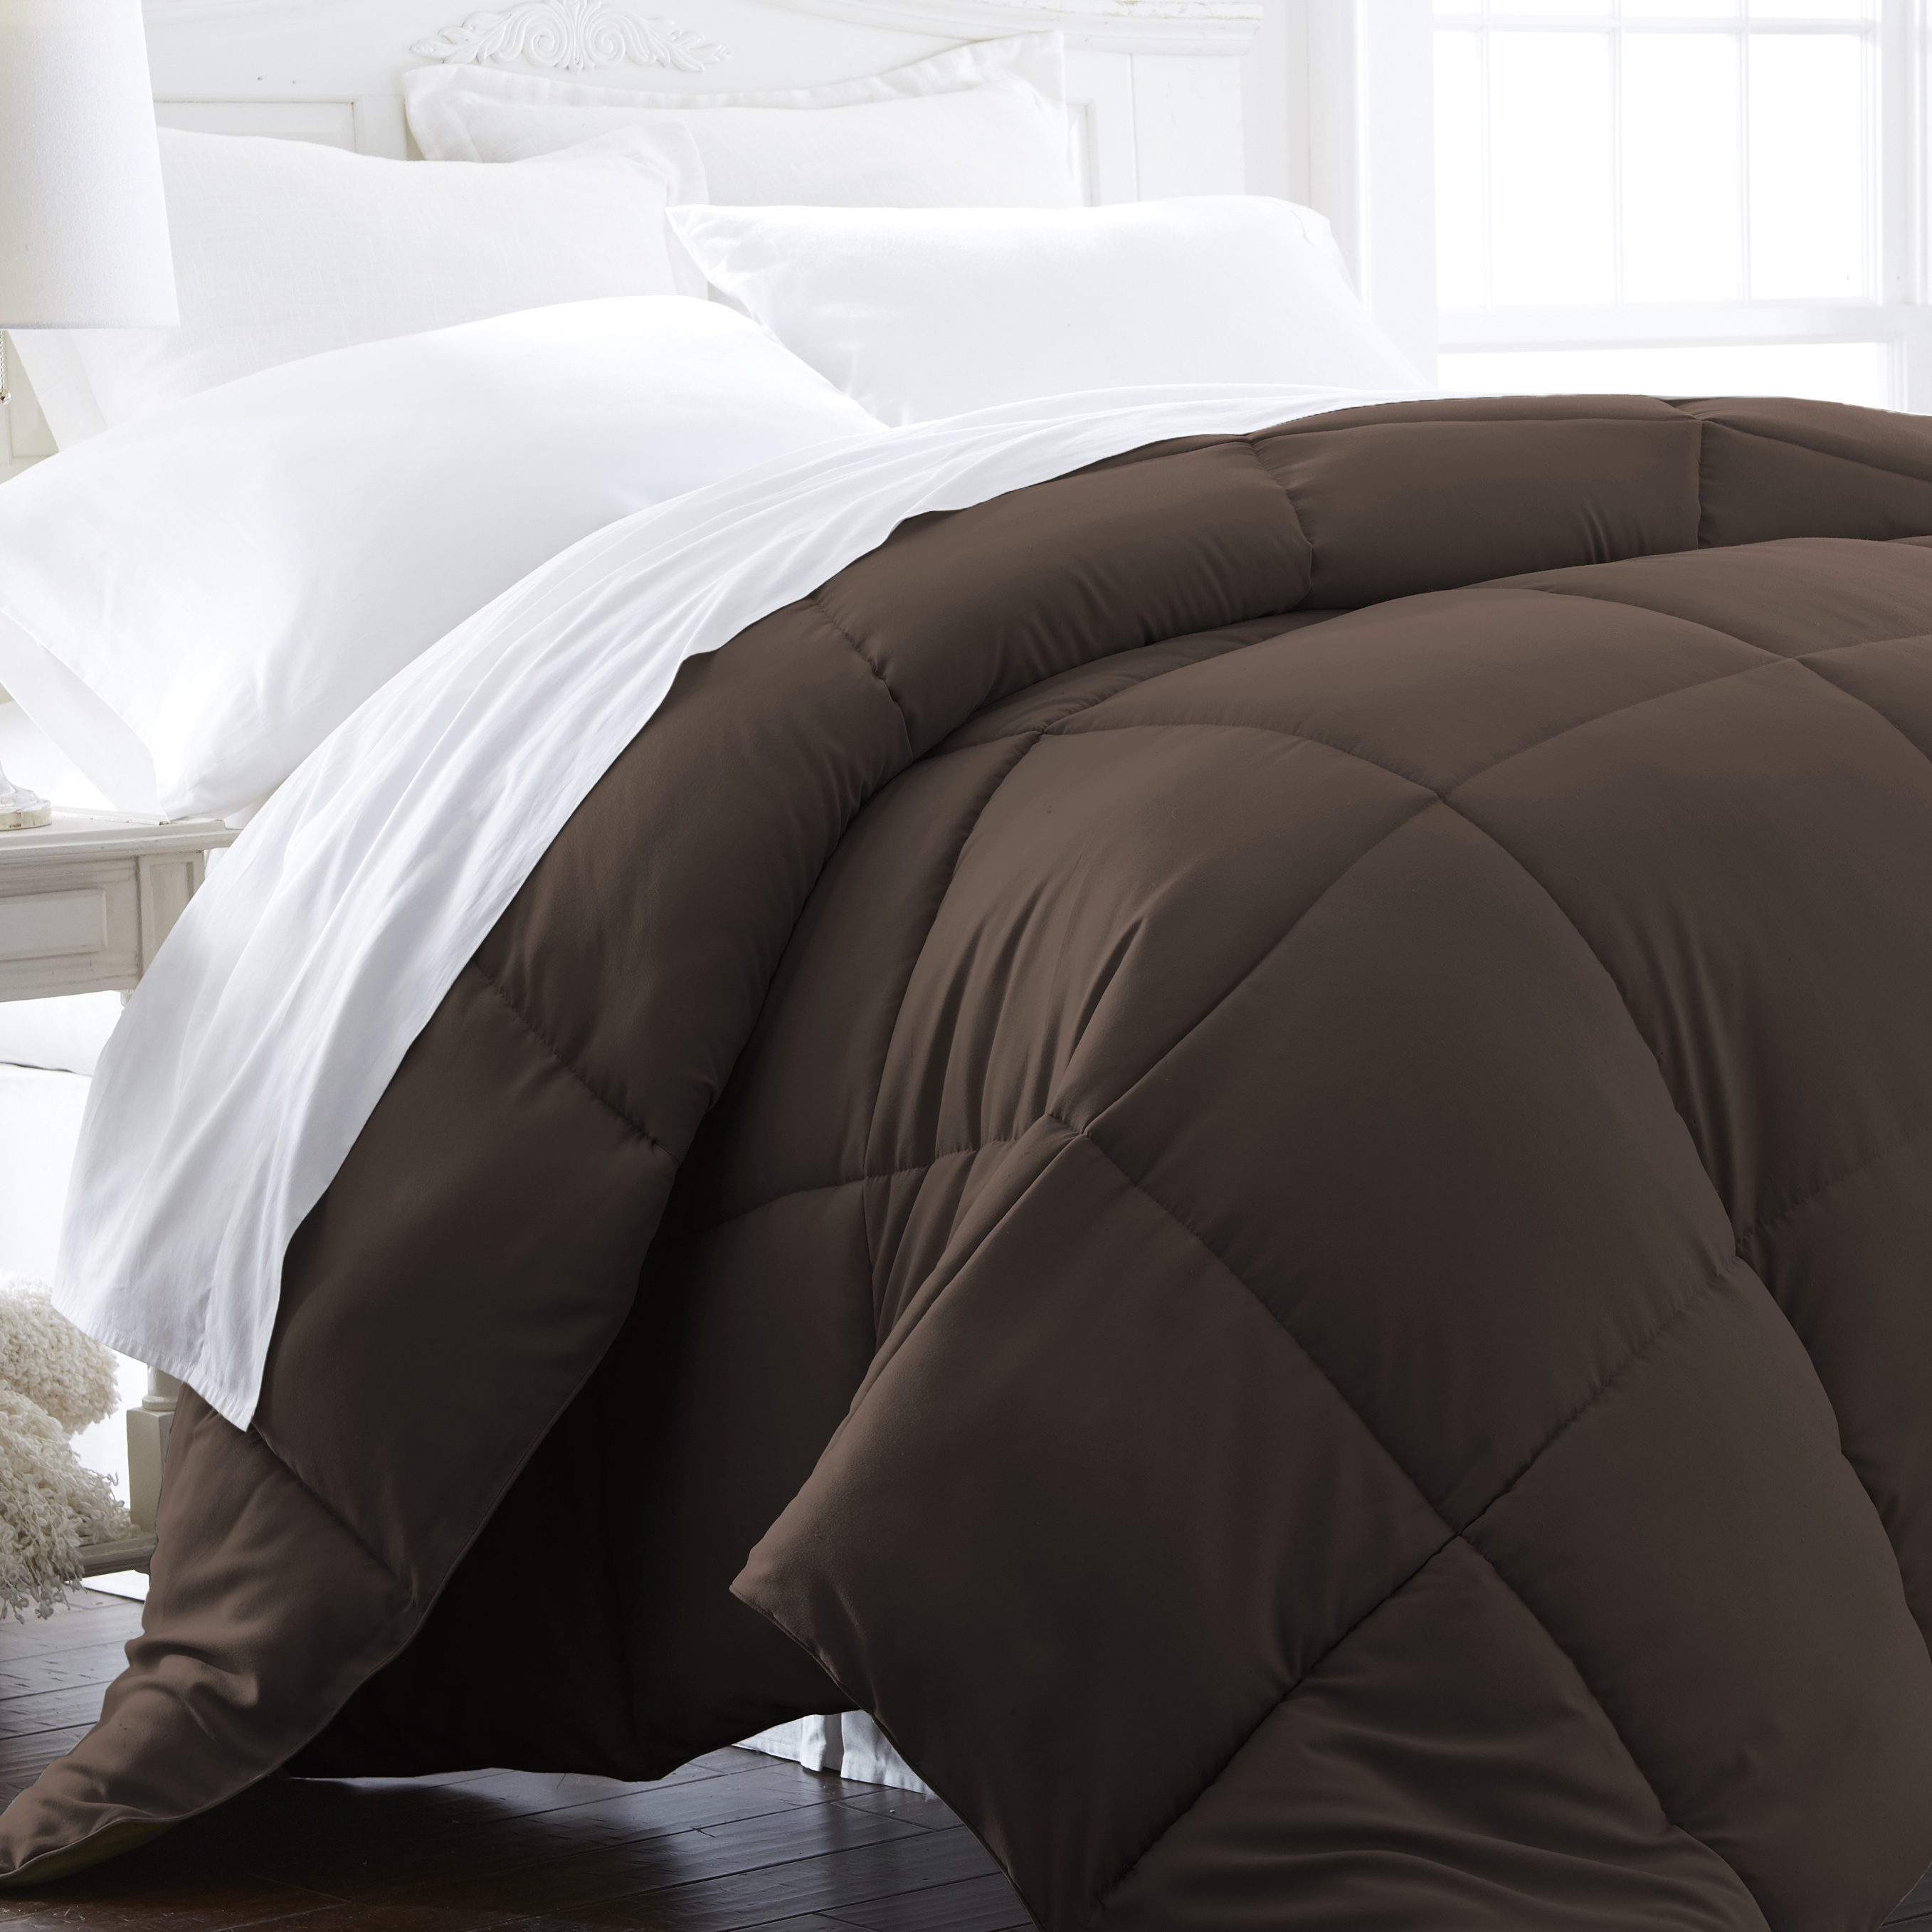 Home Collection All-season Ultra Soft Down Alternative Comforter In 6 Colors - Chocolate, King